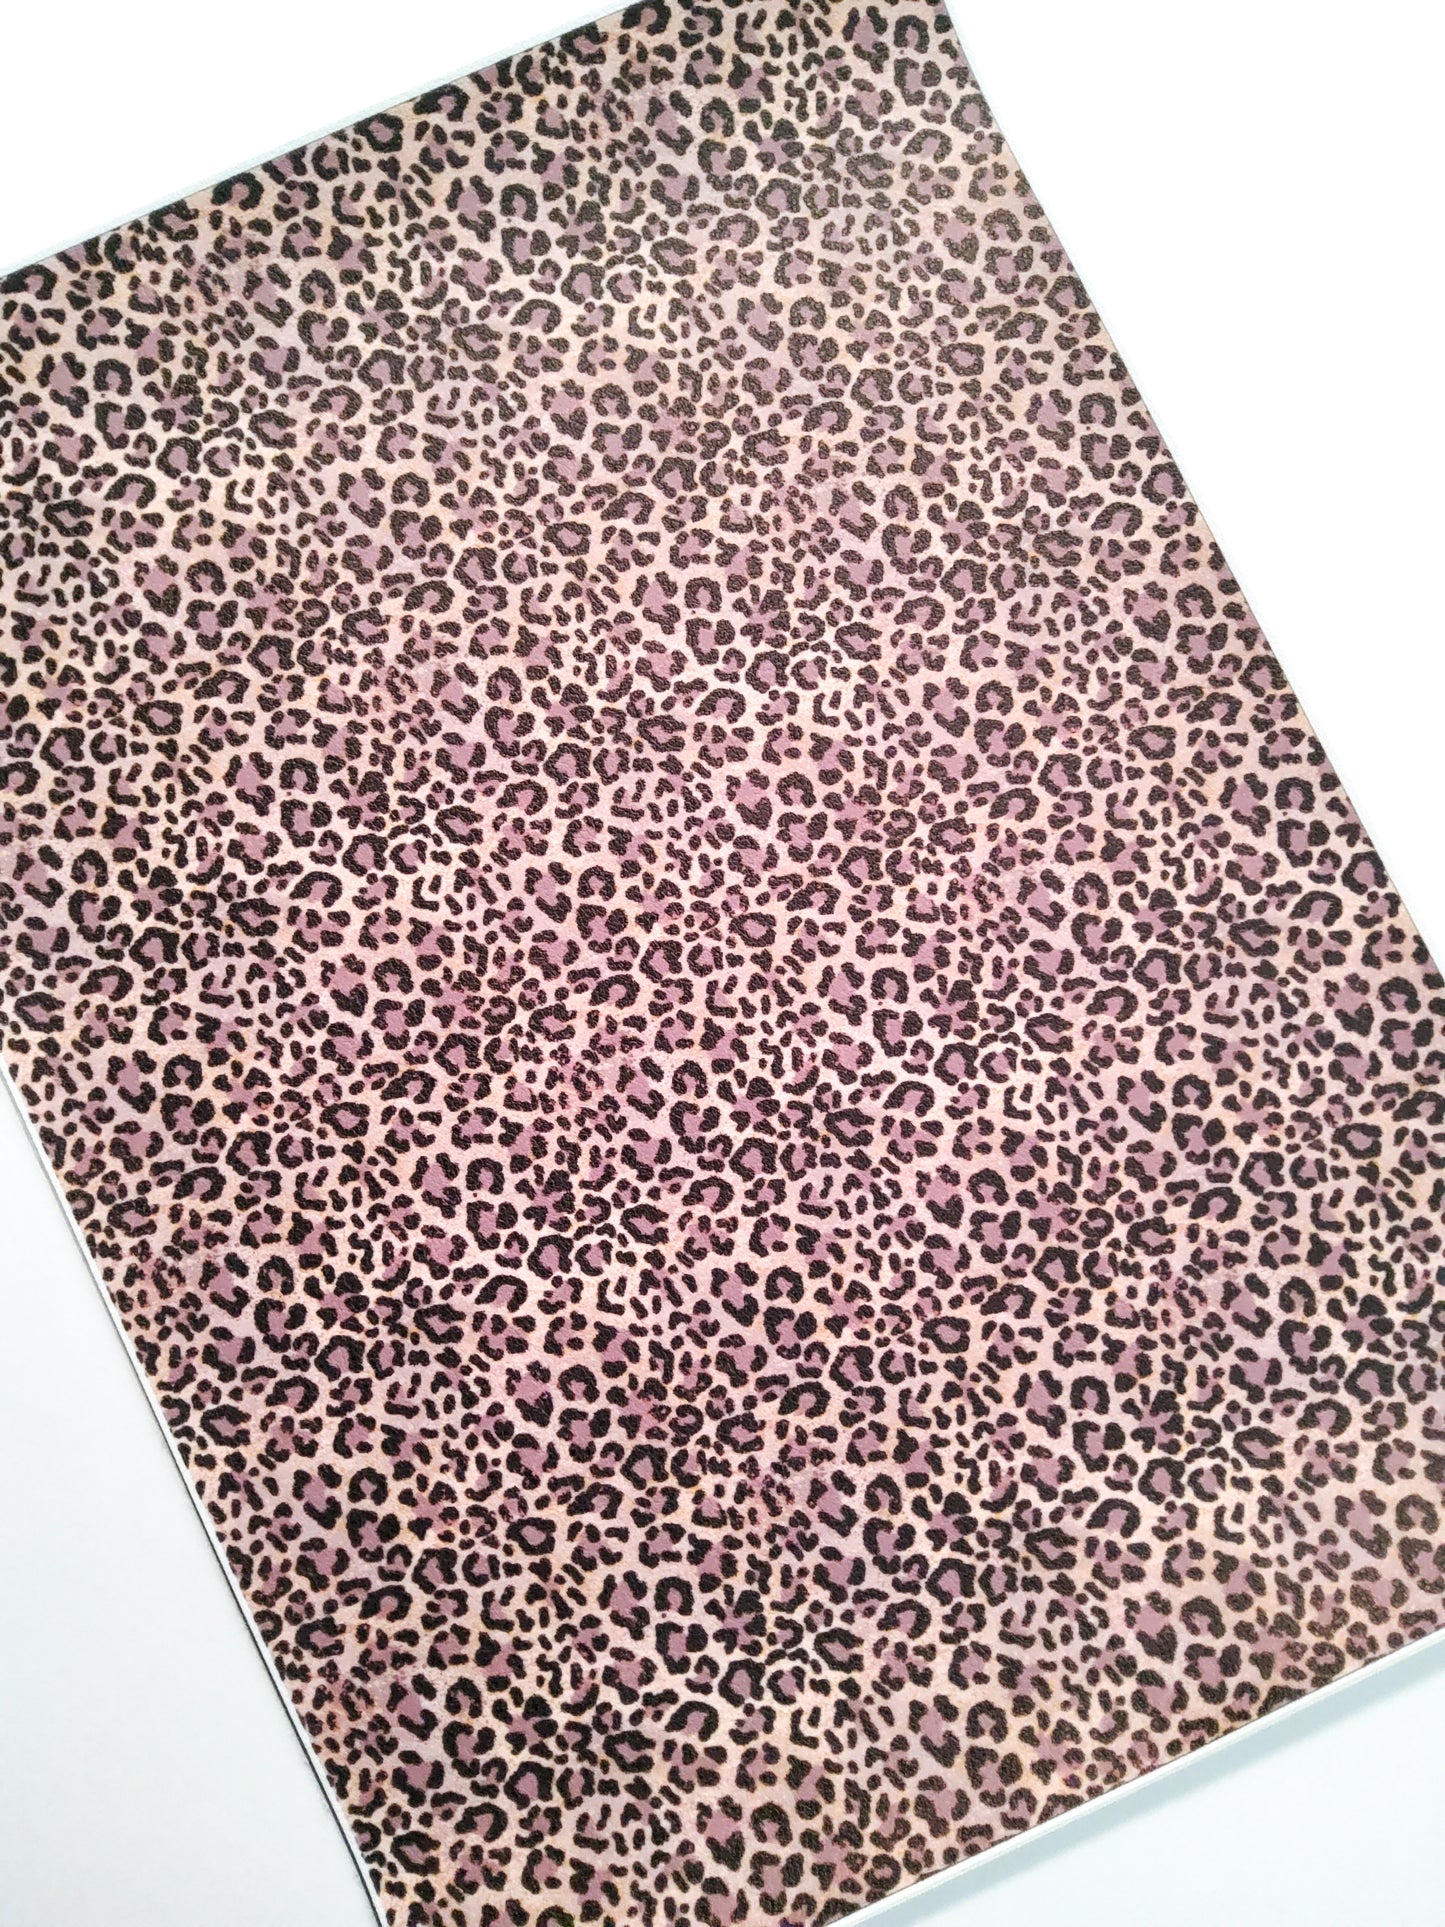 Muted Brown Animal Print 9x12 faux leather sheet